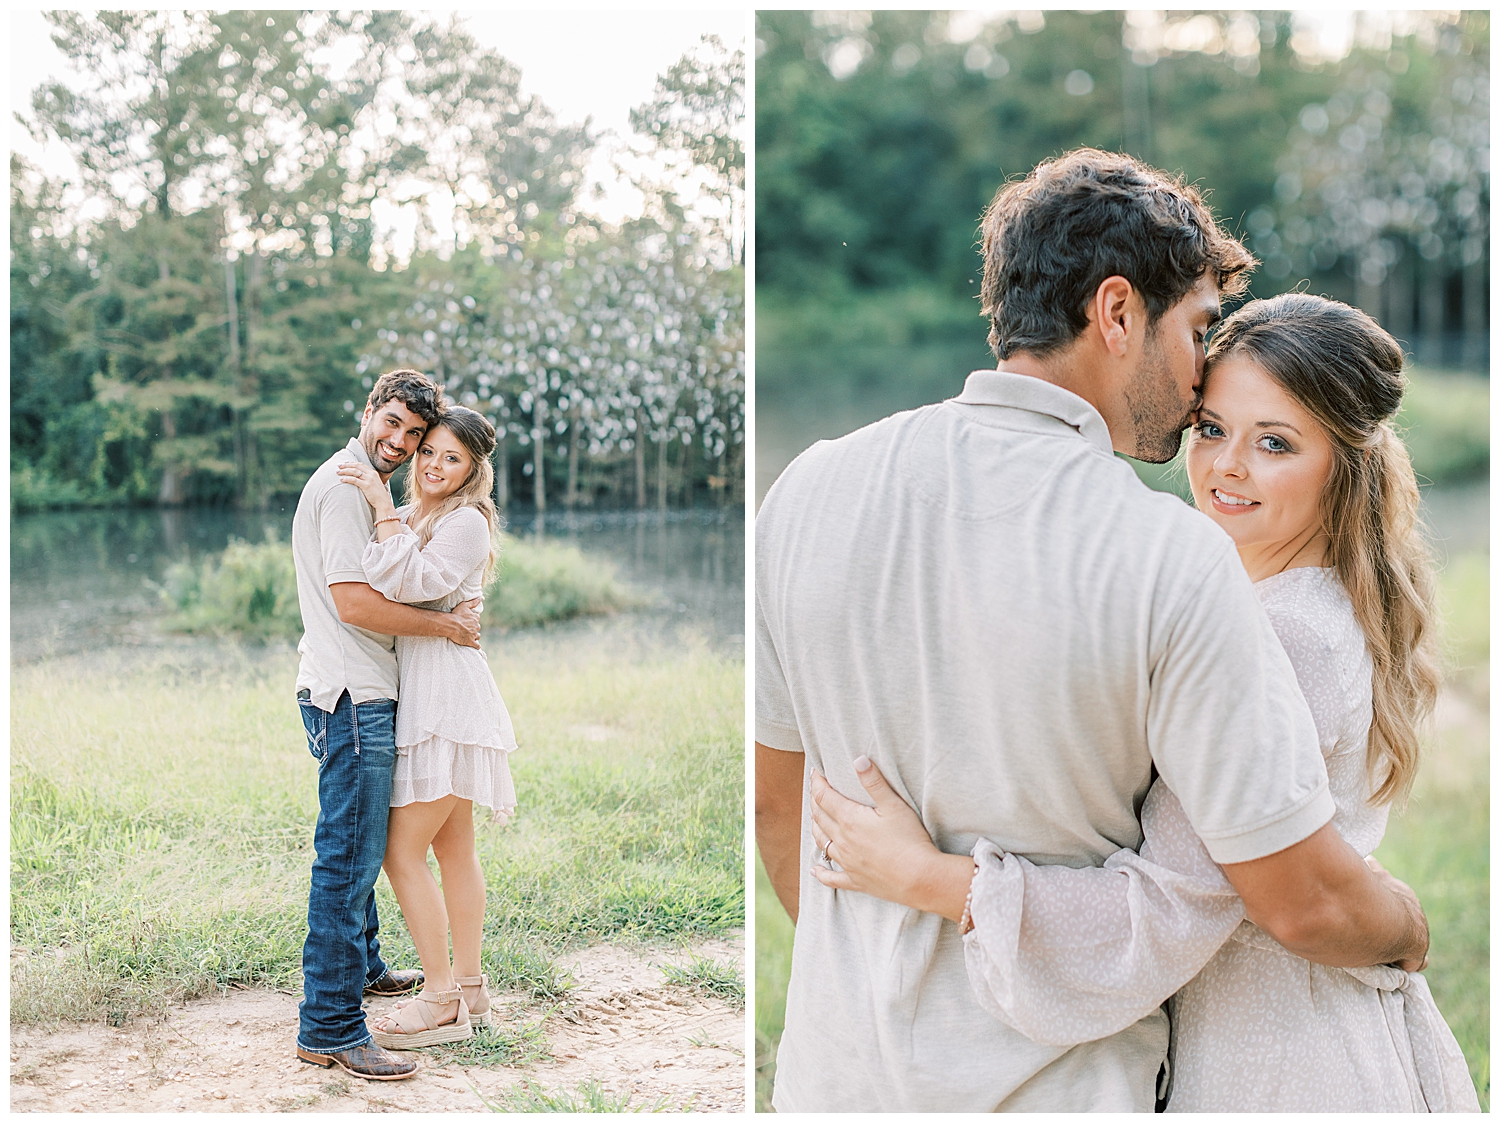 A couple kisses in the summer engagement photos.